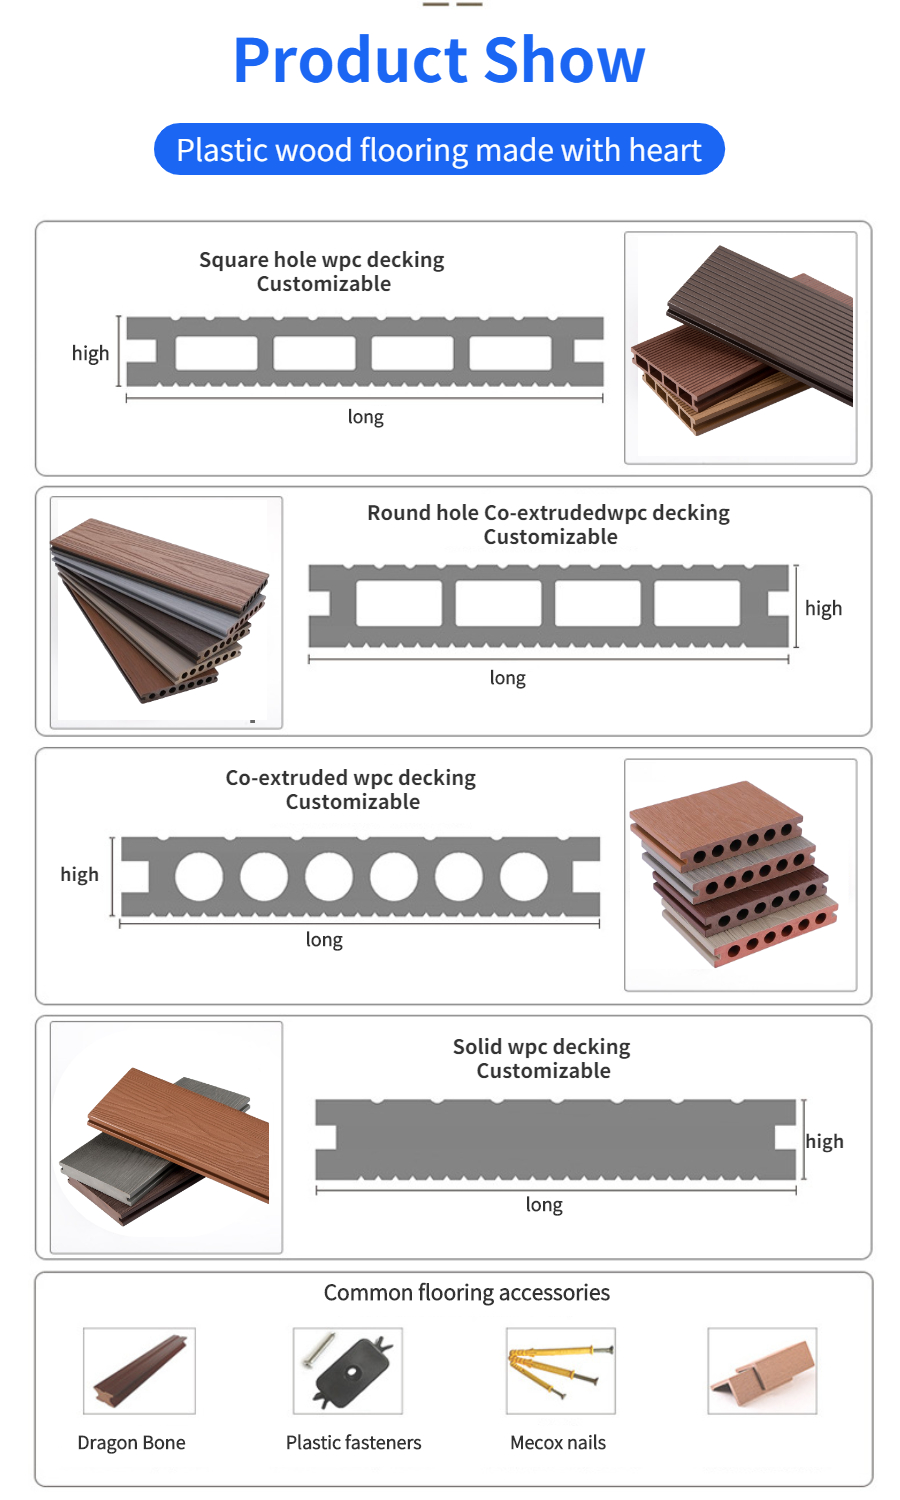 coextruded flooring products